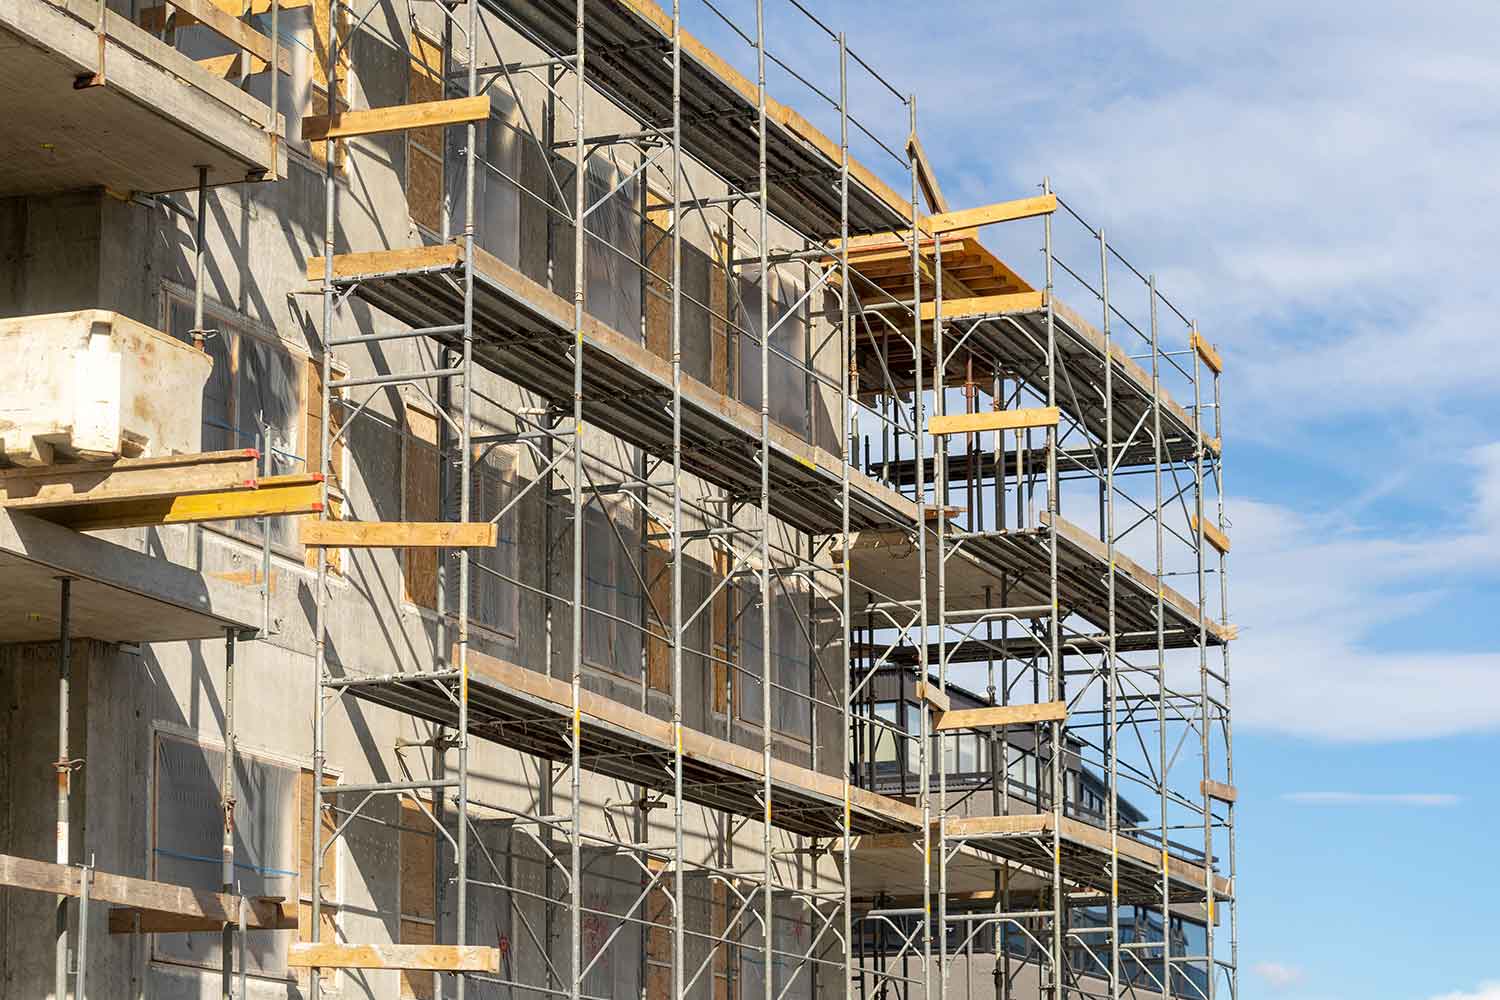 How Can Hiring a Commercial Scaffolding Assist With Business Renovations